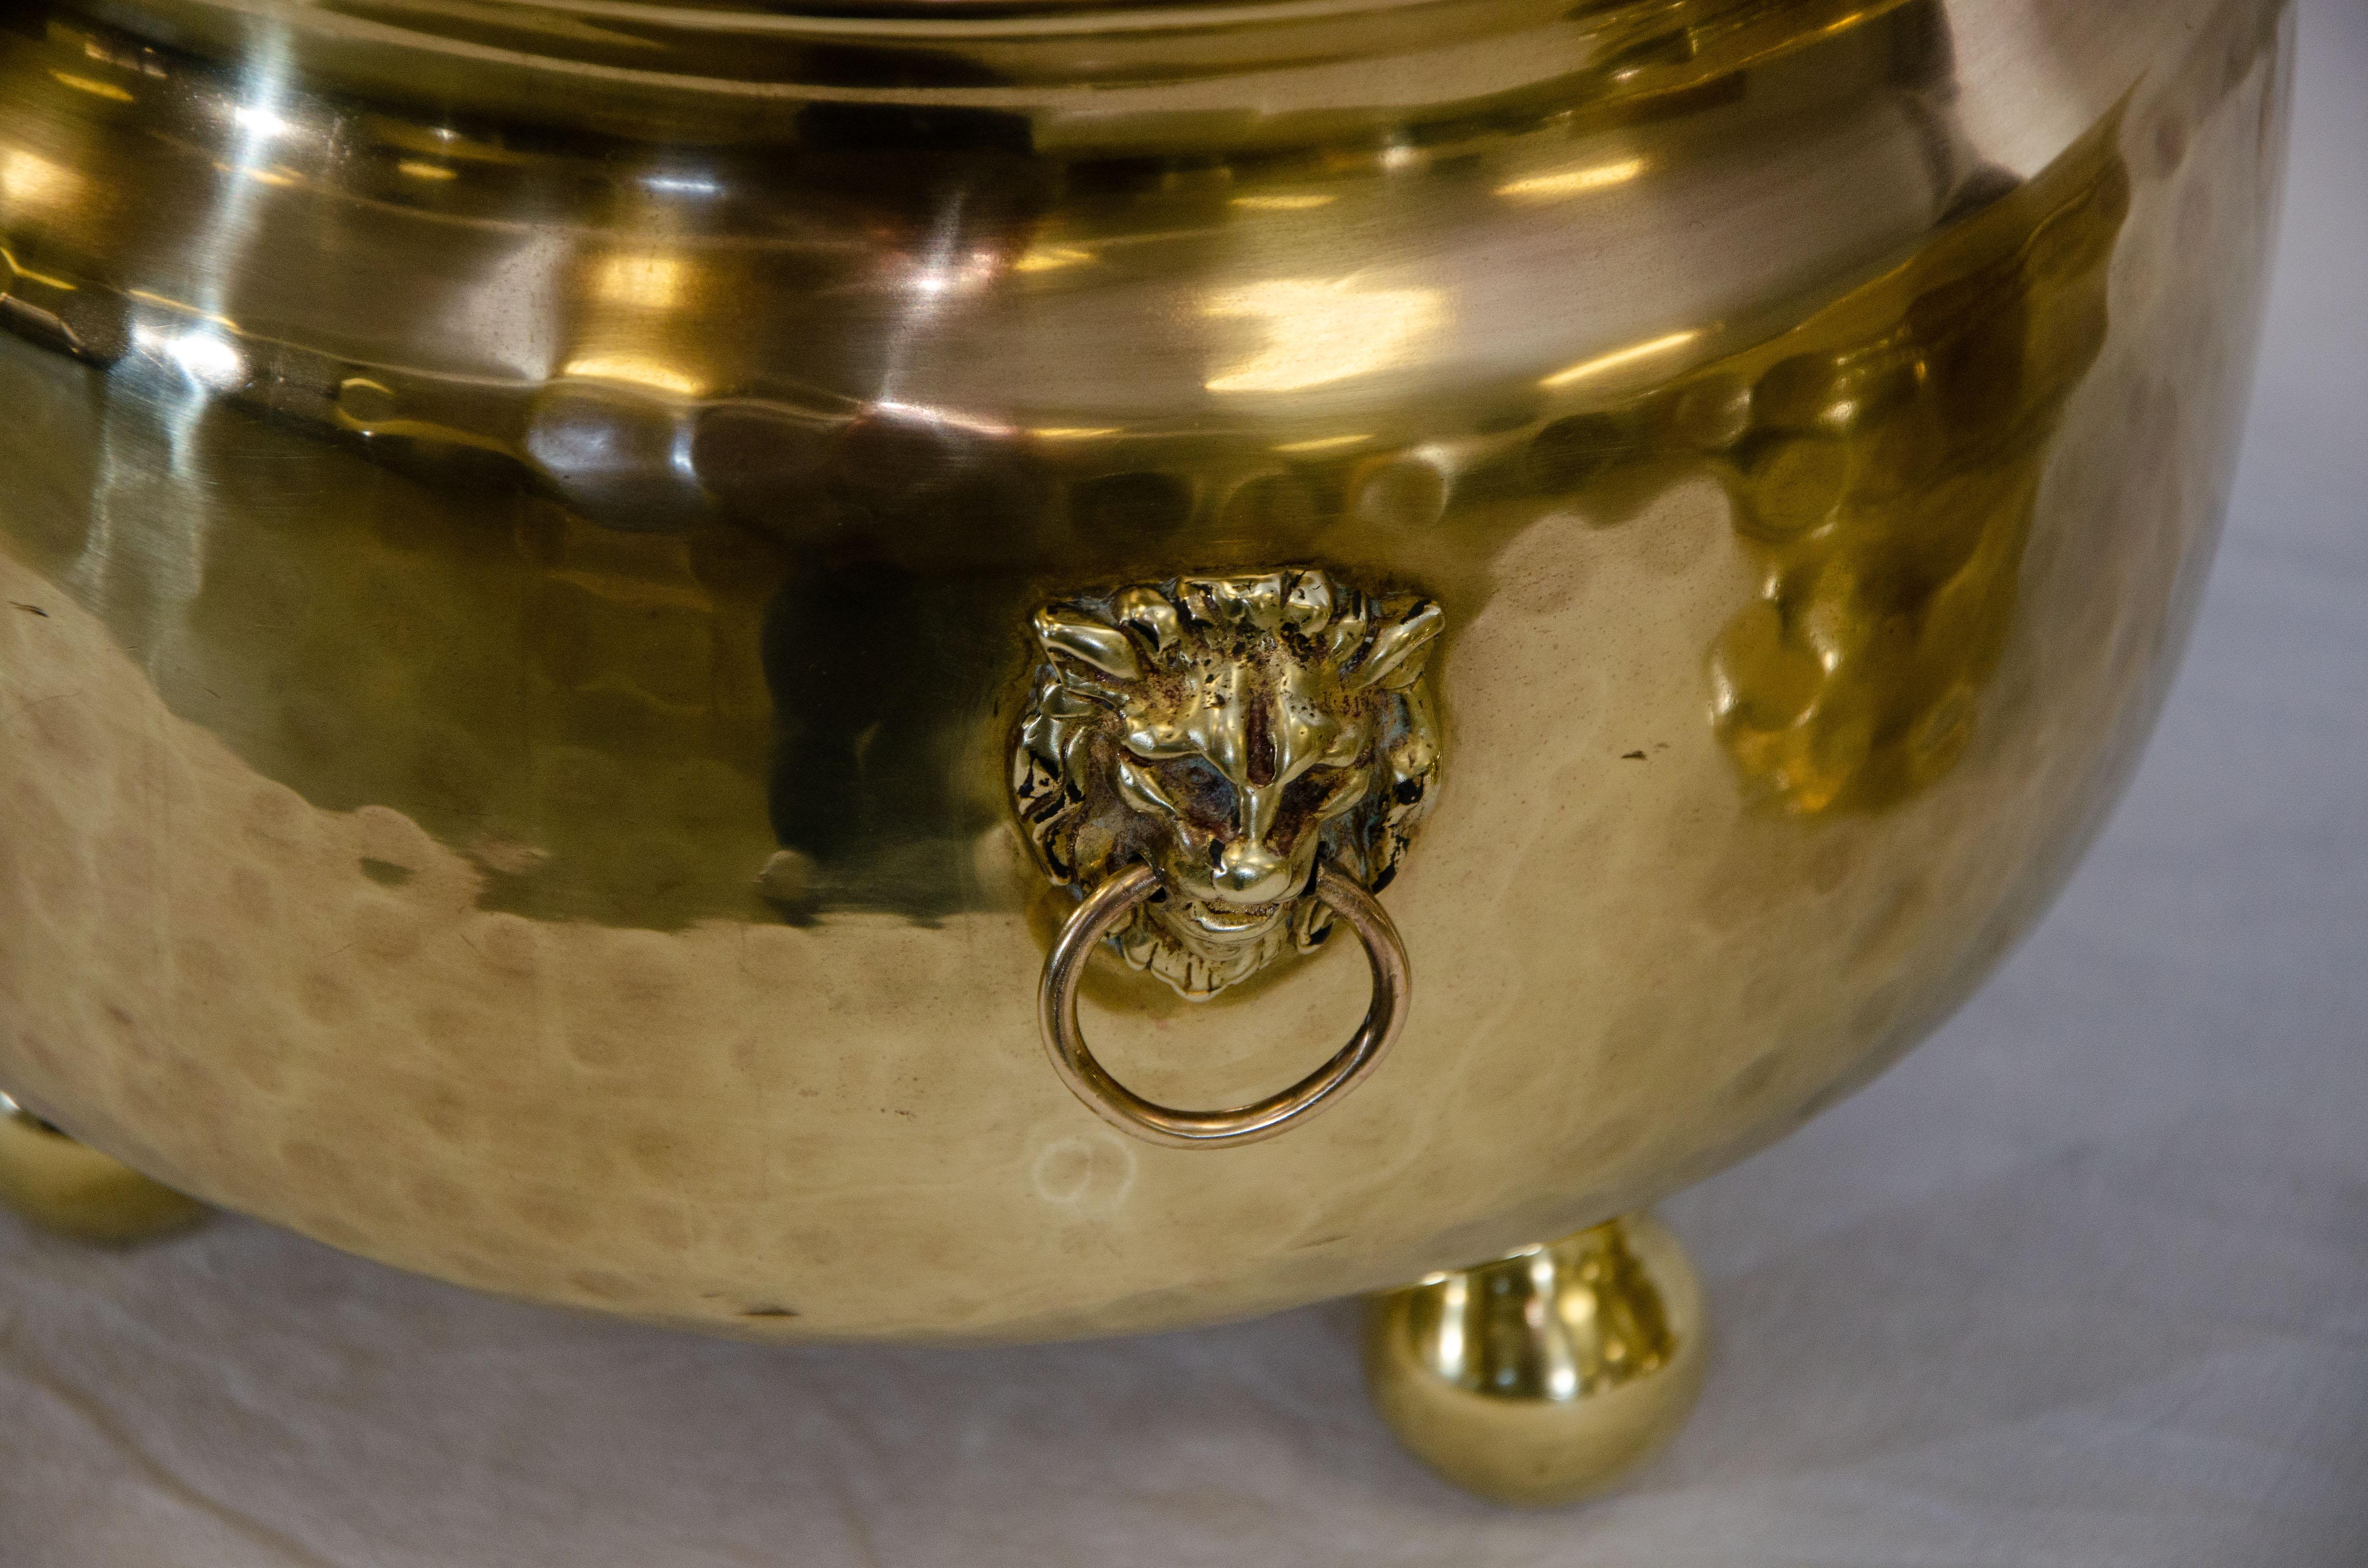 Collection of 3 Hammered Brass Jardinières, Cache Pot, Planters In Good Condition For Sale In Crockett, CA